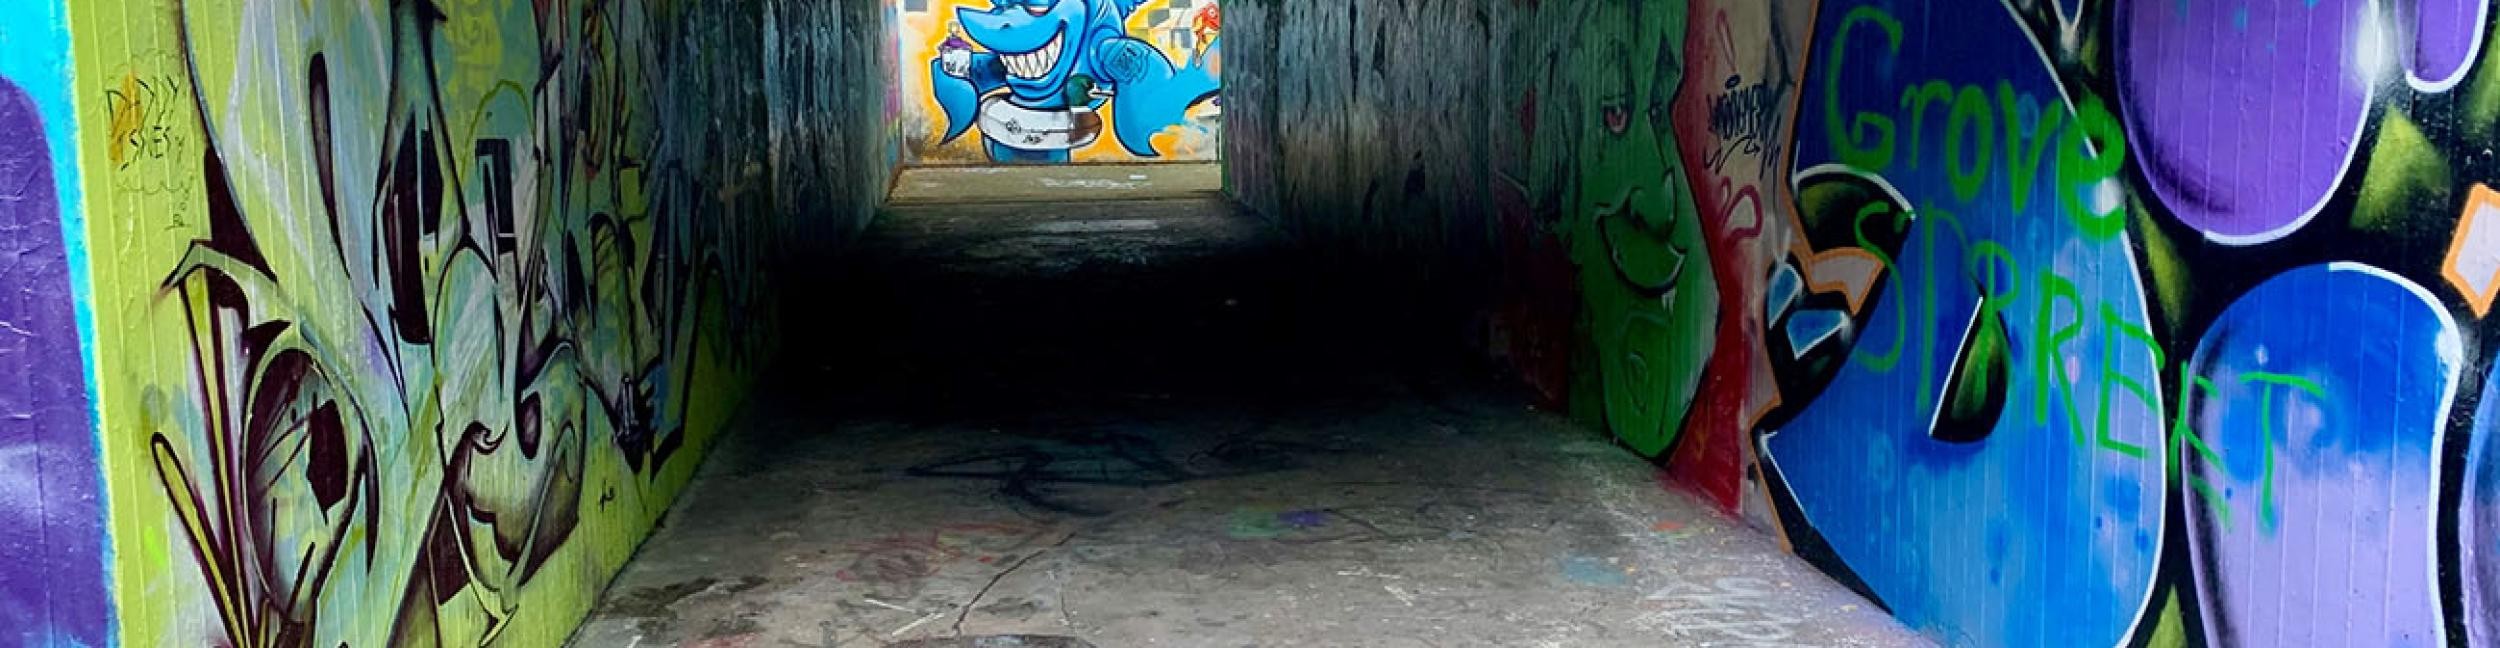 Underpass with colorful graffiti on the walls - letters, green face, blue shark with swimming ring